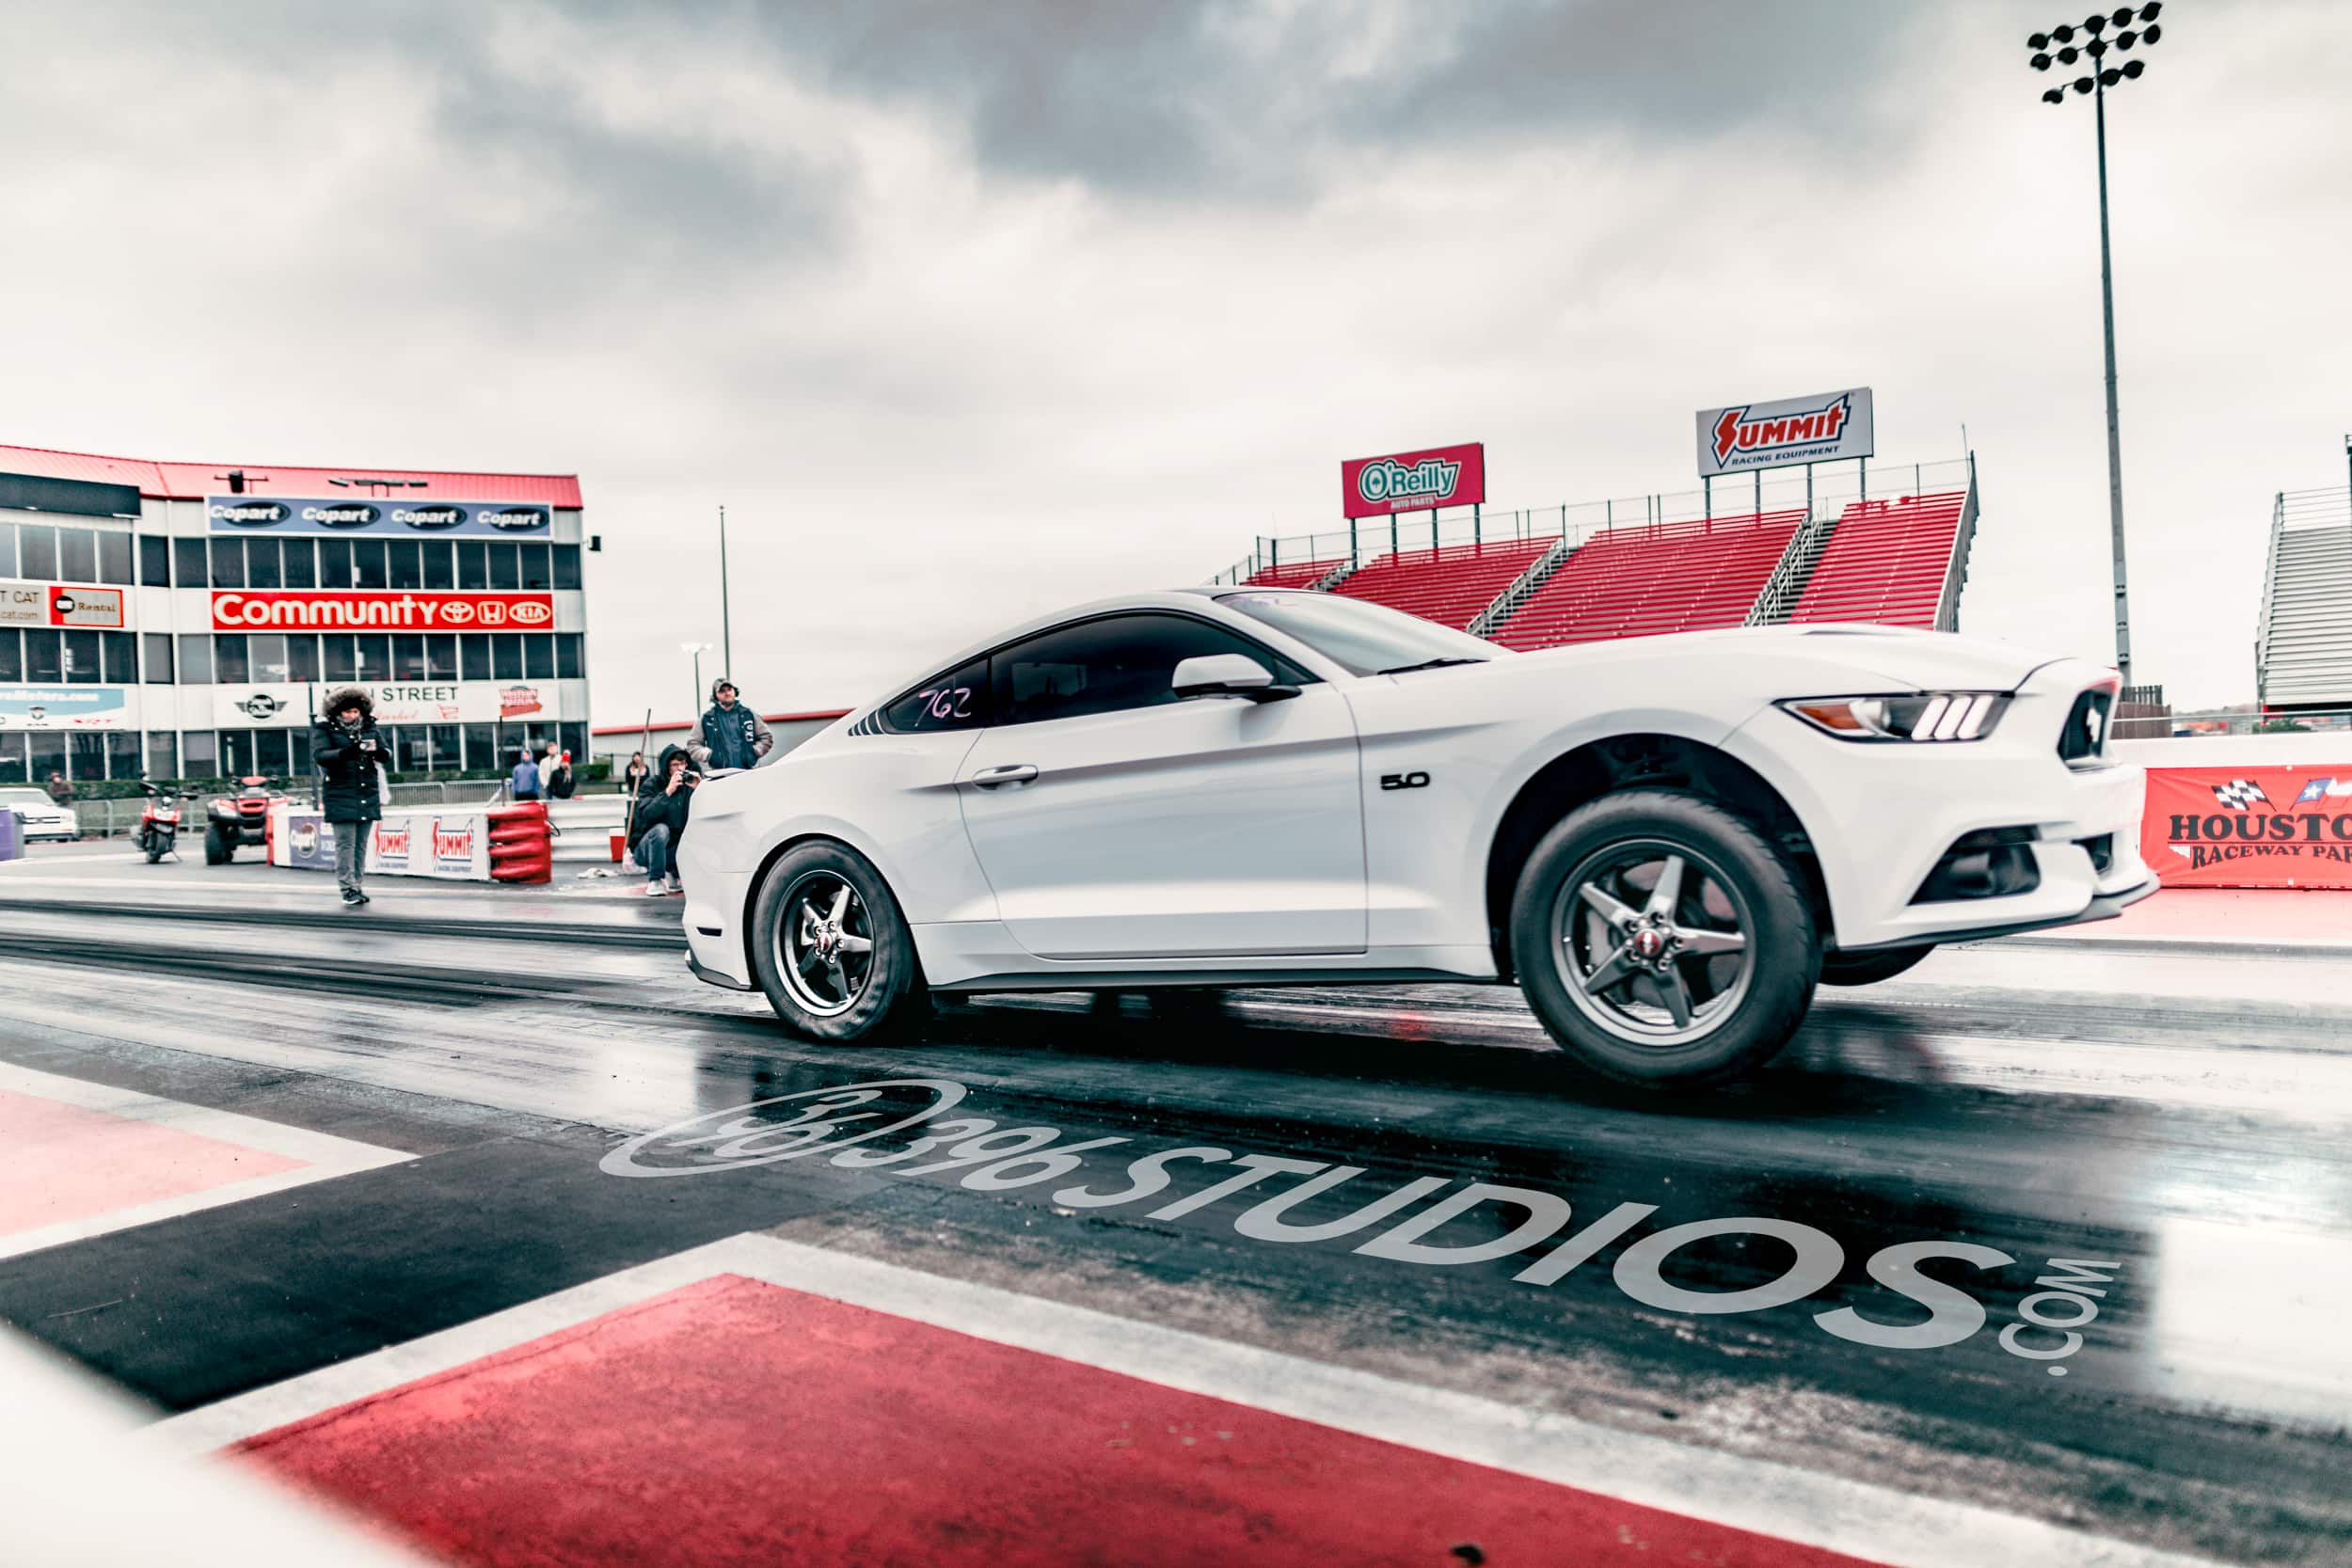 White Mustang launches wheels off ground at a quarter mile track